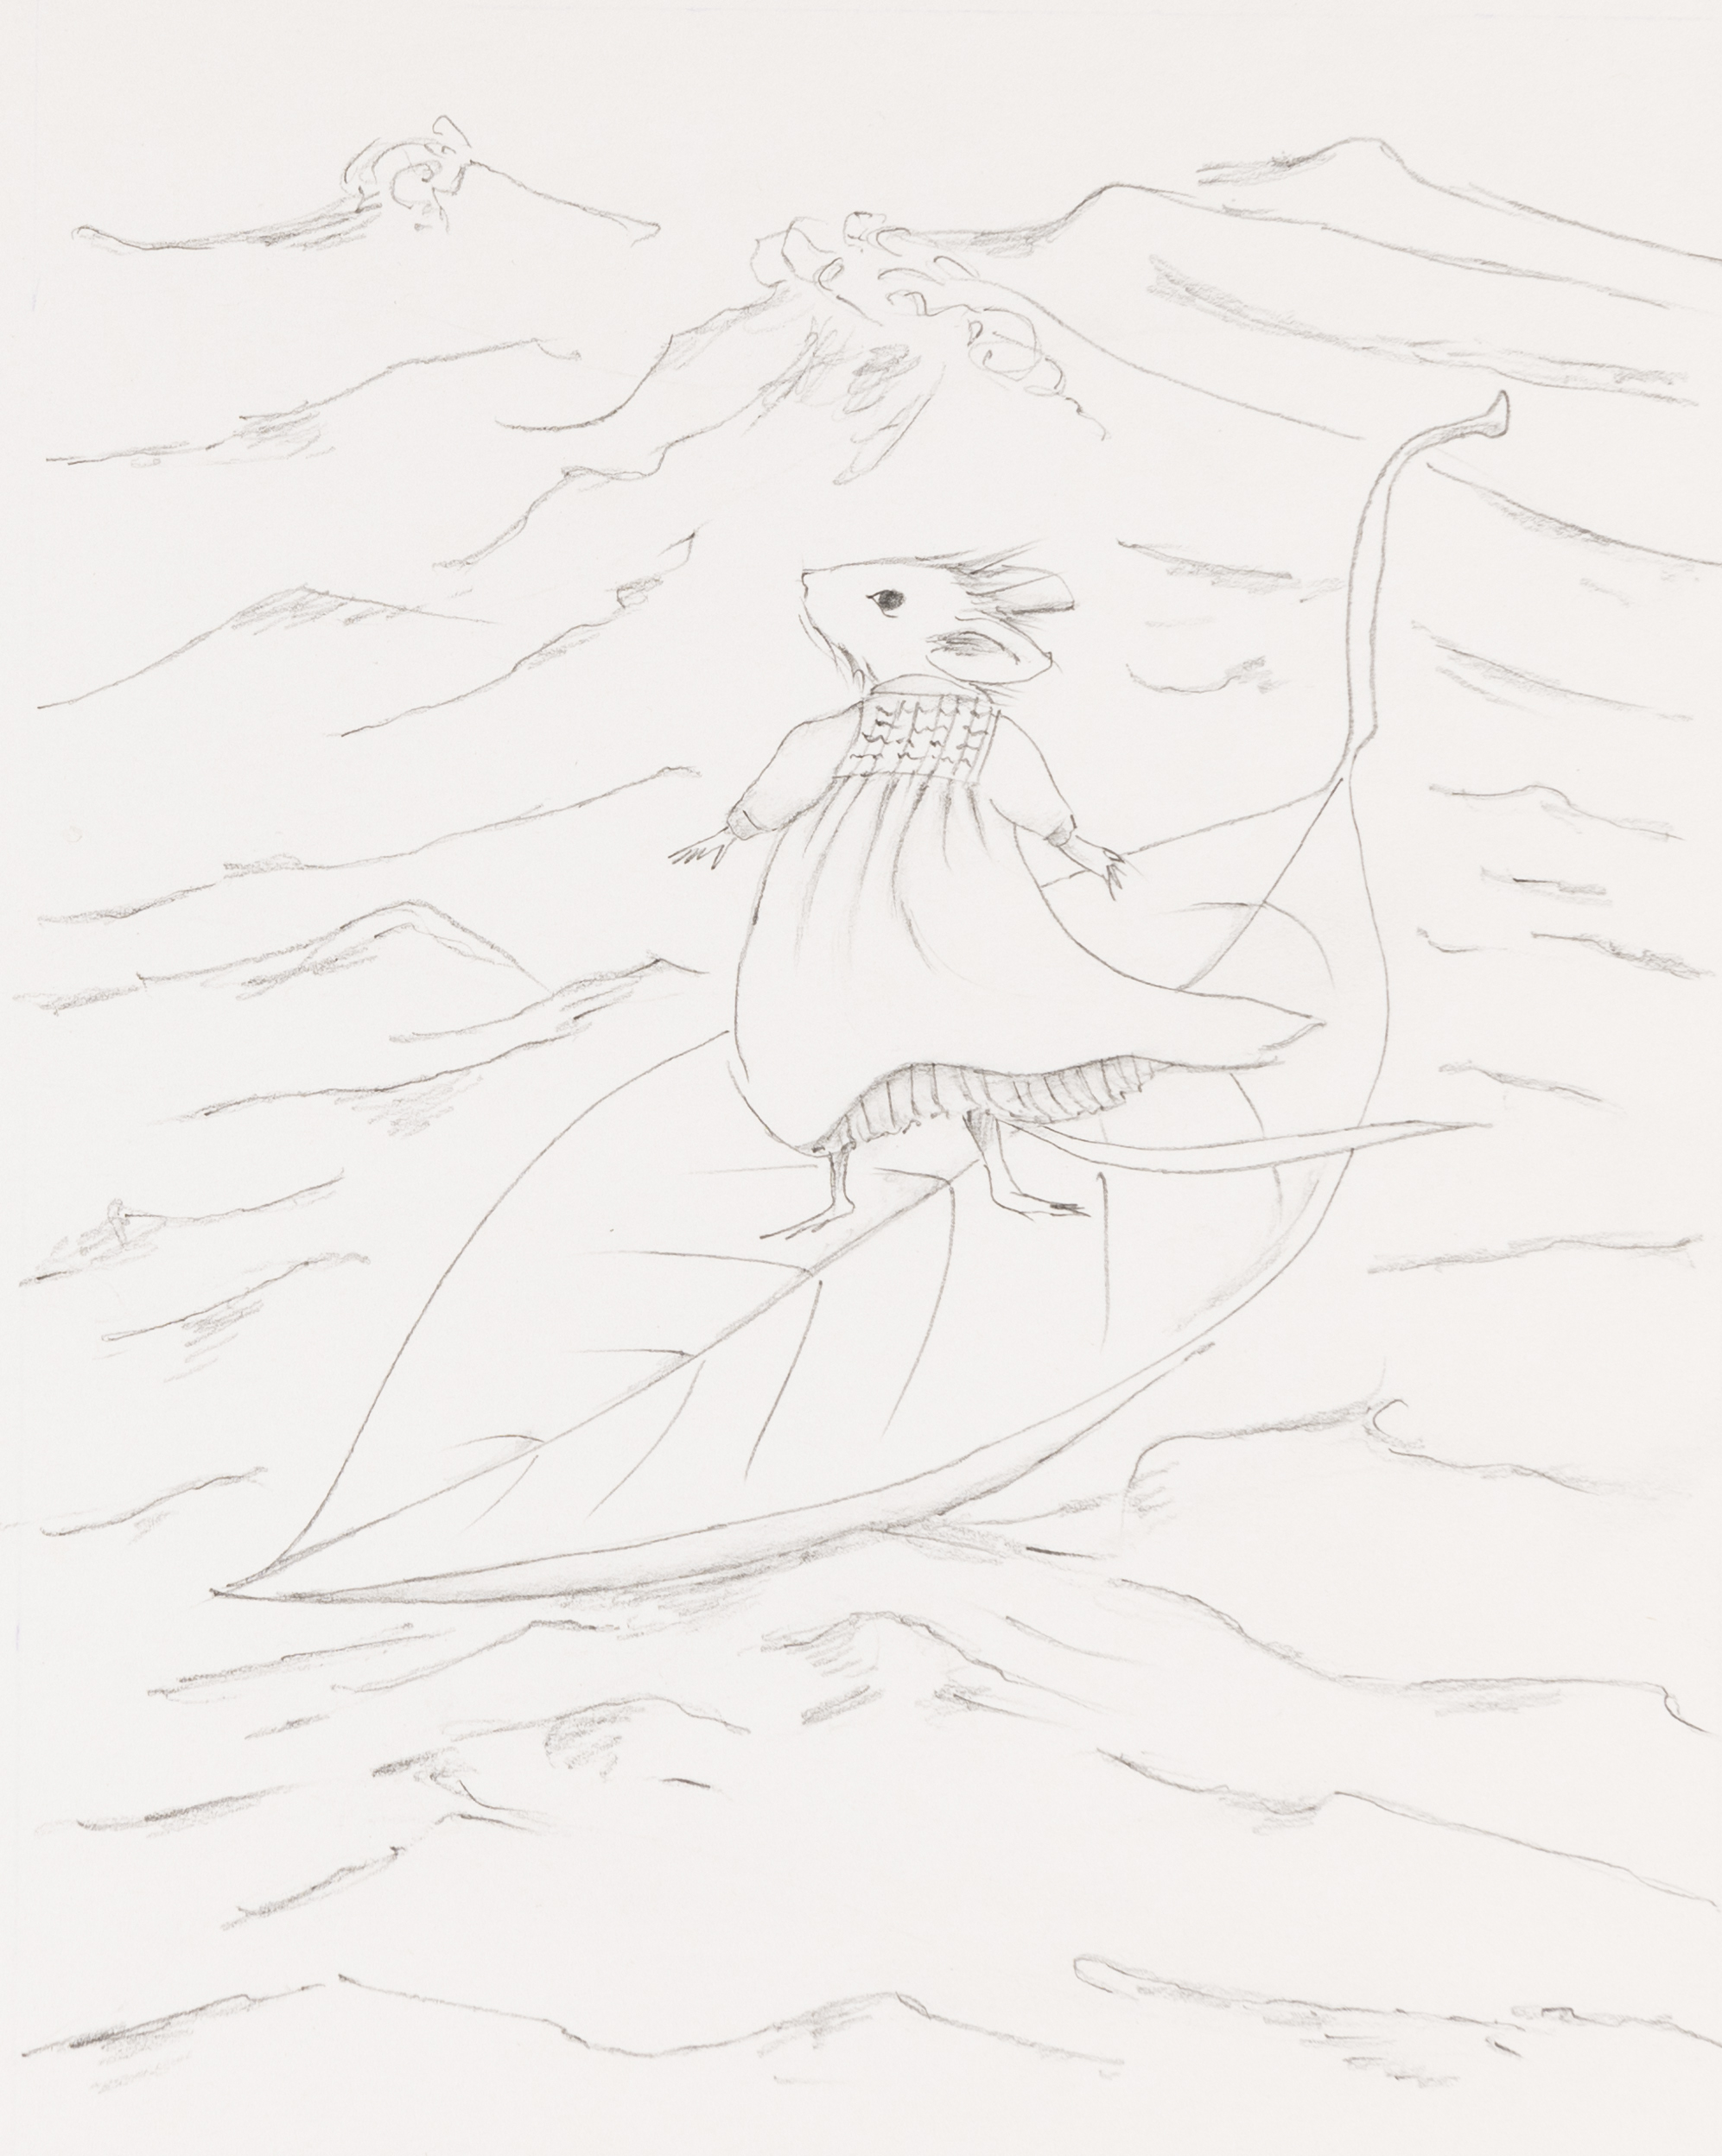 Illustration of mouse riding leaf on water. 